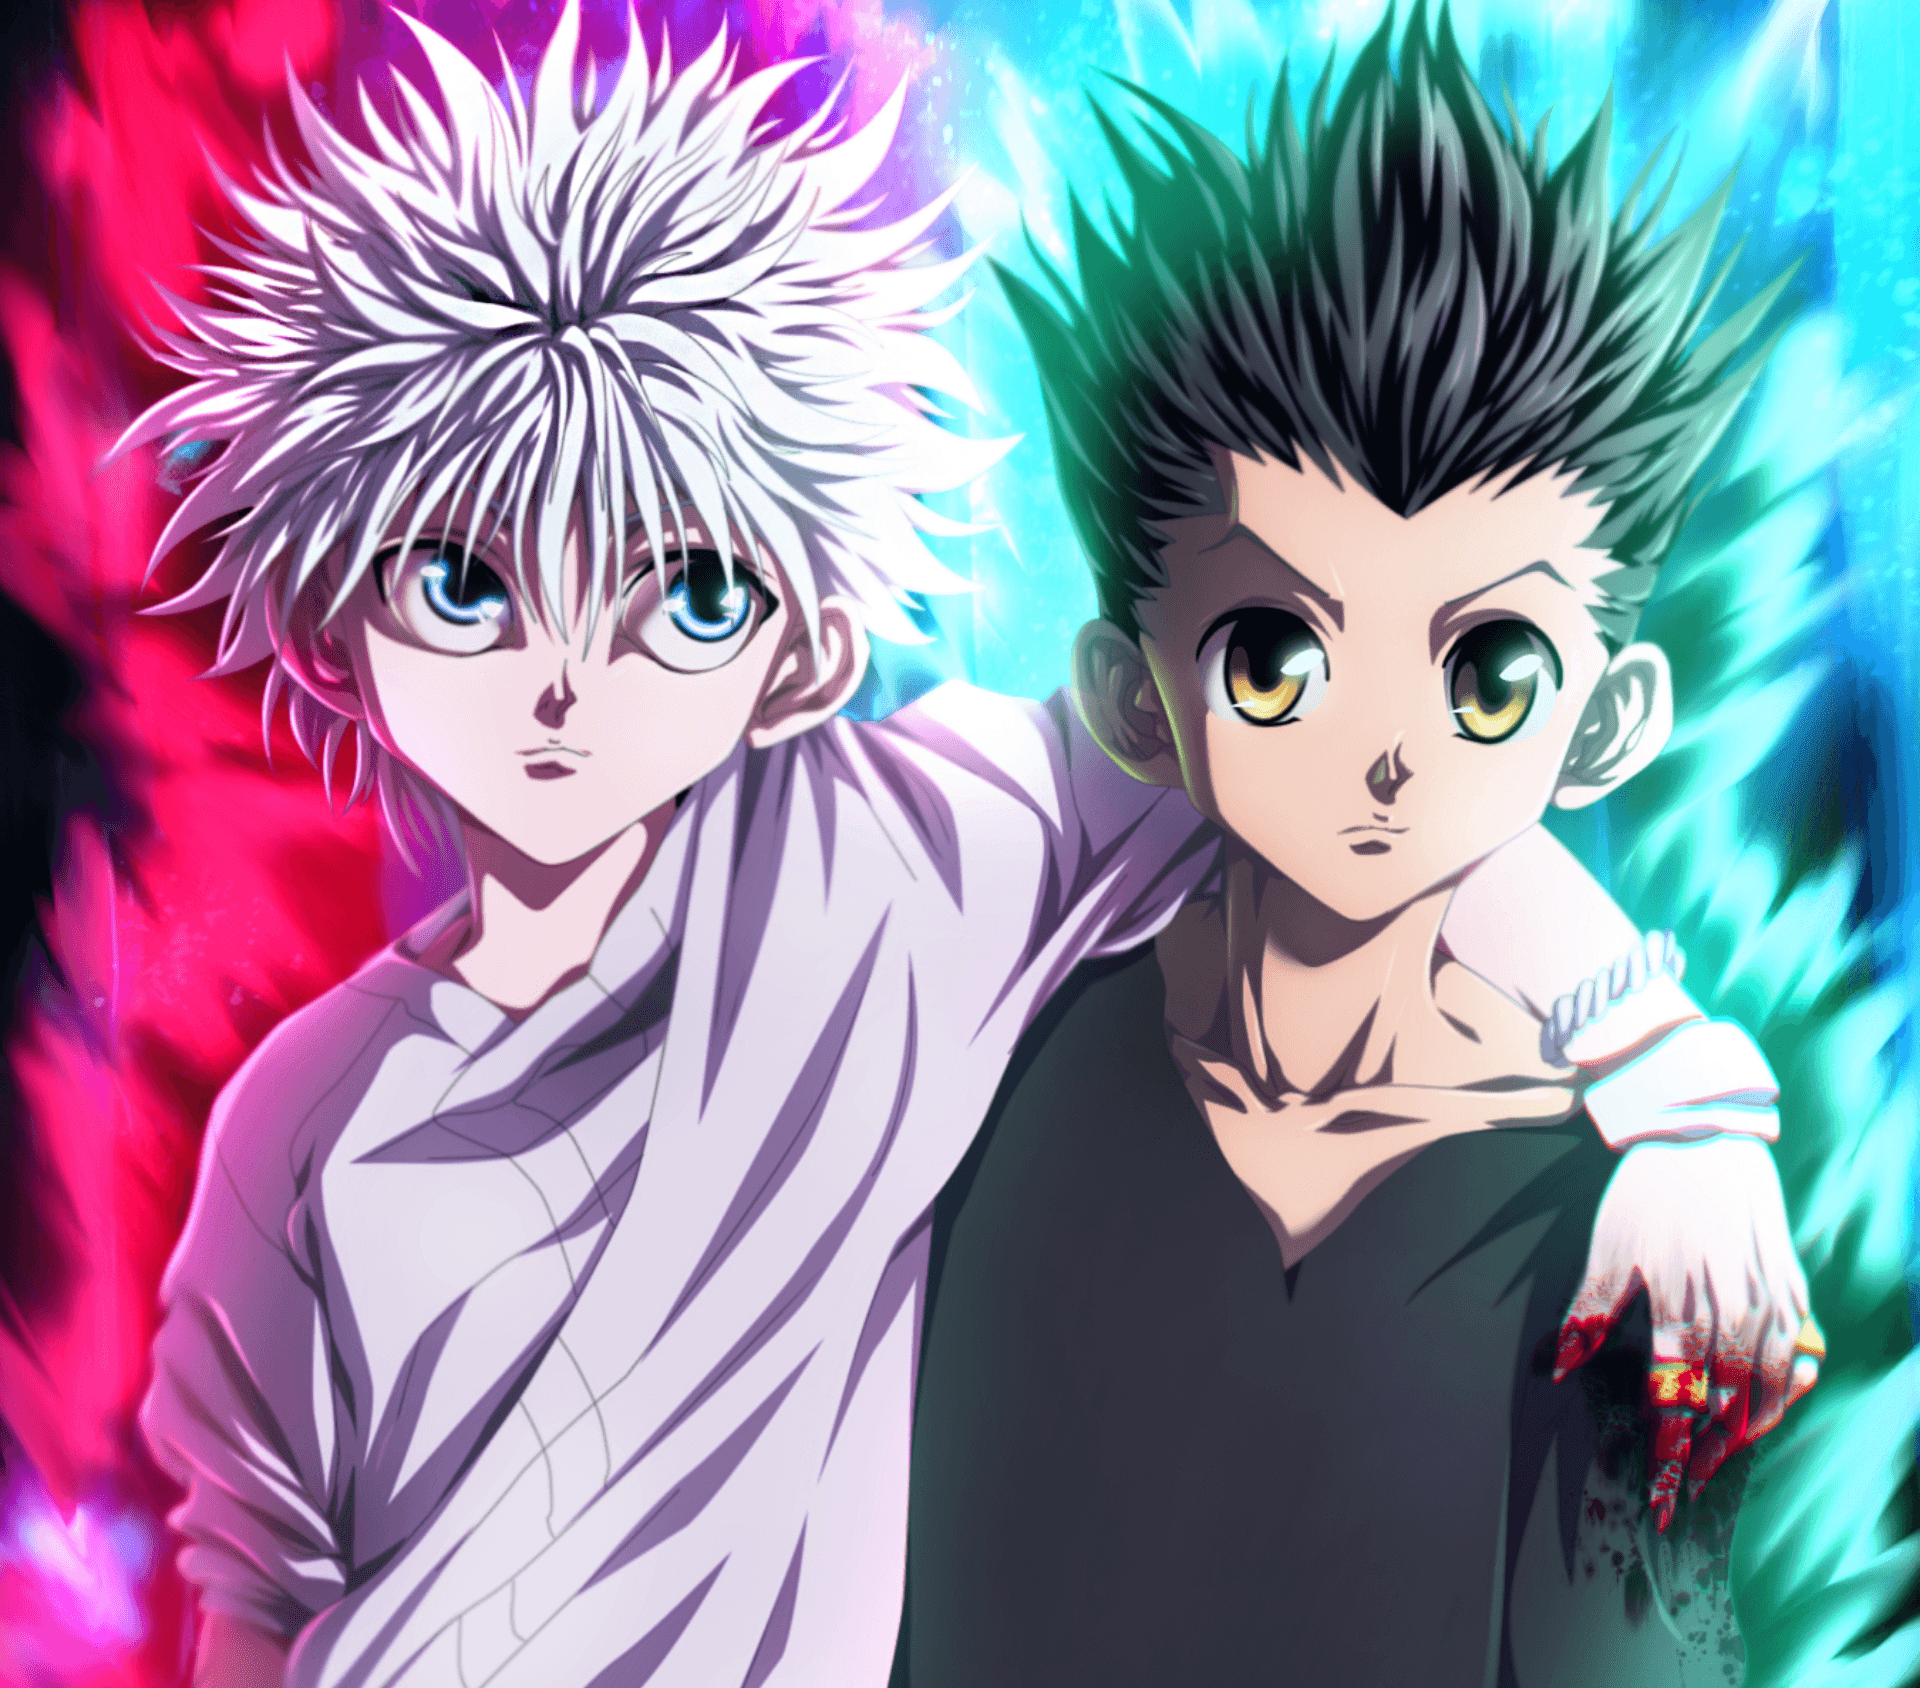 A silly little edit I made of angry Gon  rHunterXHunter